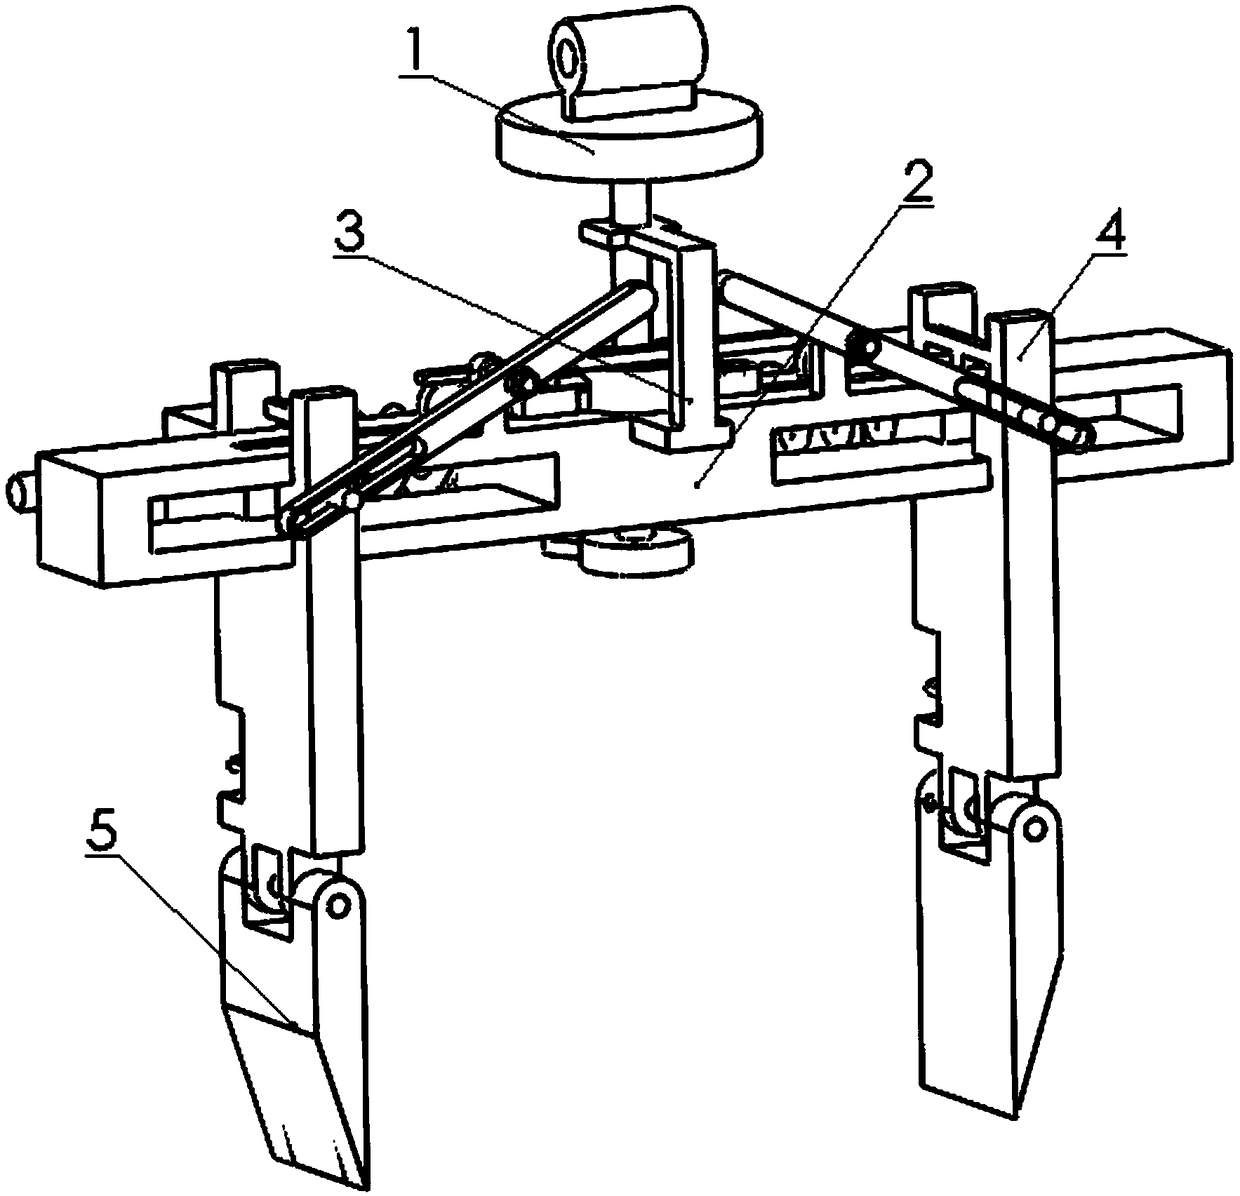 Object clamping device for medical experiment